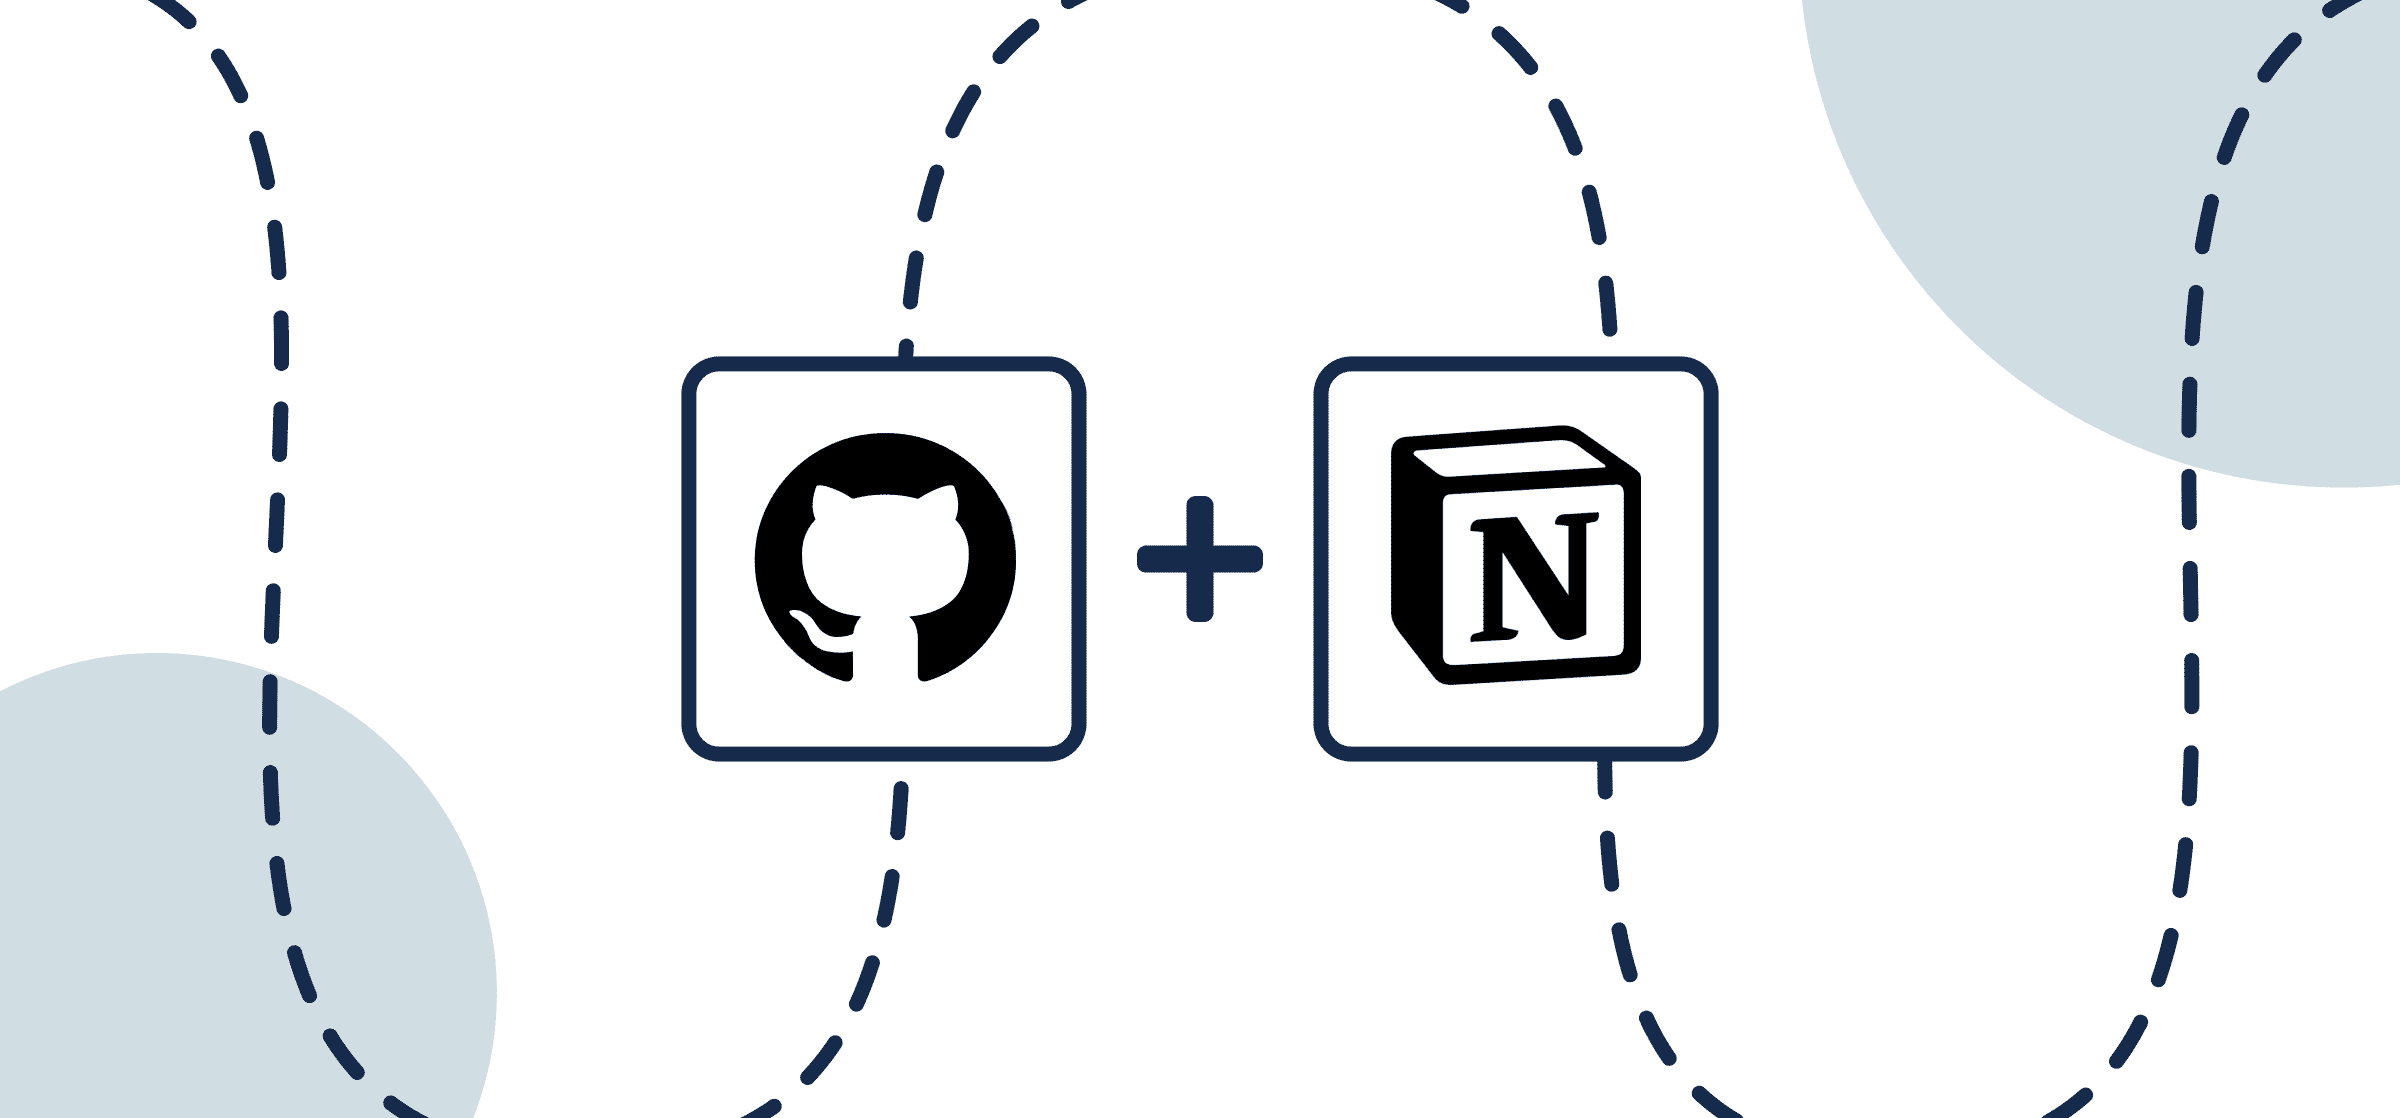 Featured image with Logos for GitHub and Notion, representing Unito's guide to syncing GitHub and Notion work items with a 2-way integration.